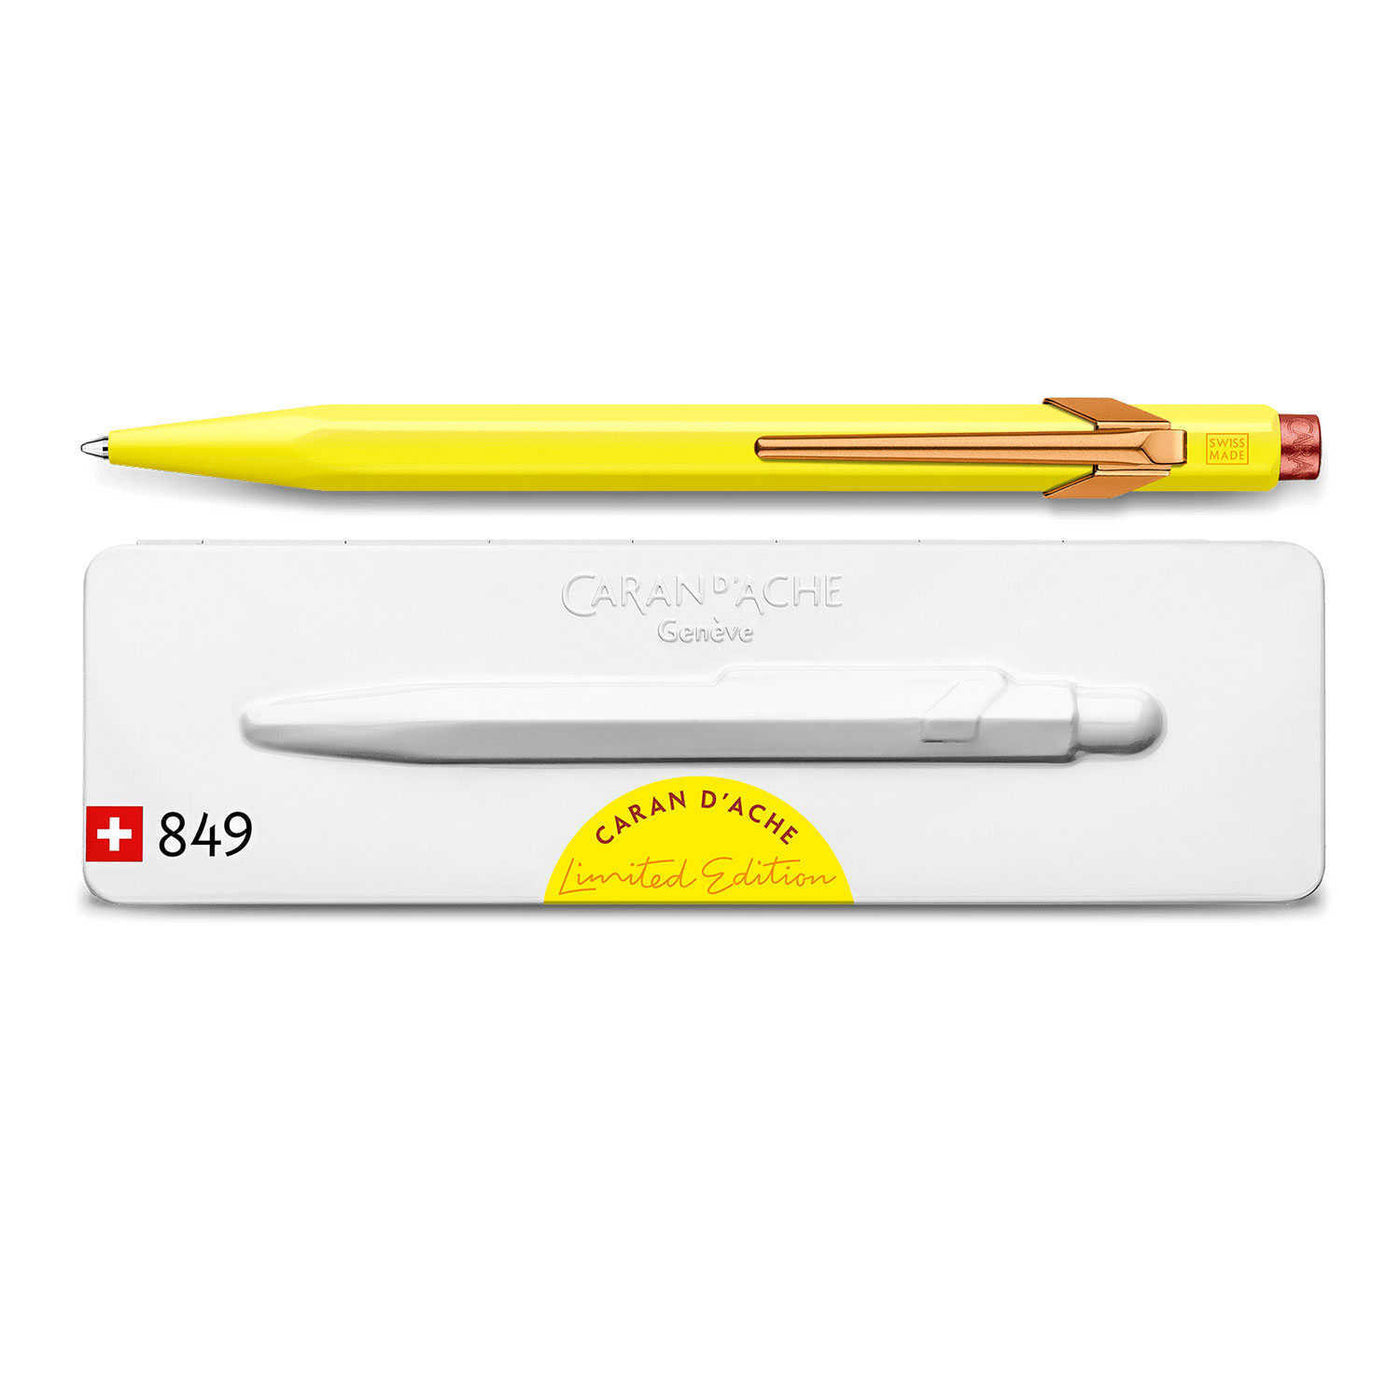 Caran d'Ache 849 Claim Your Style Ball Pen - Canary Yellow (Limited Edition) 2